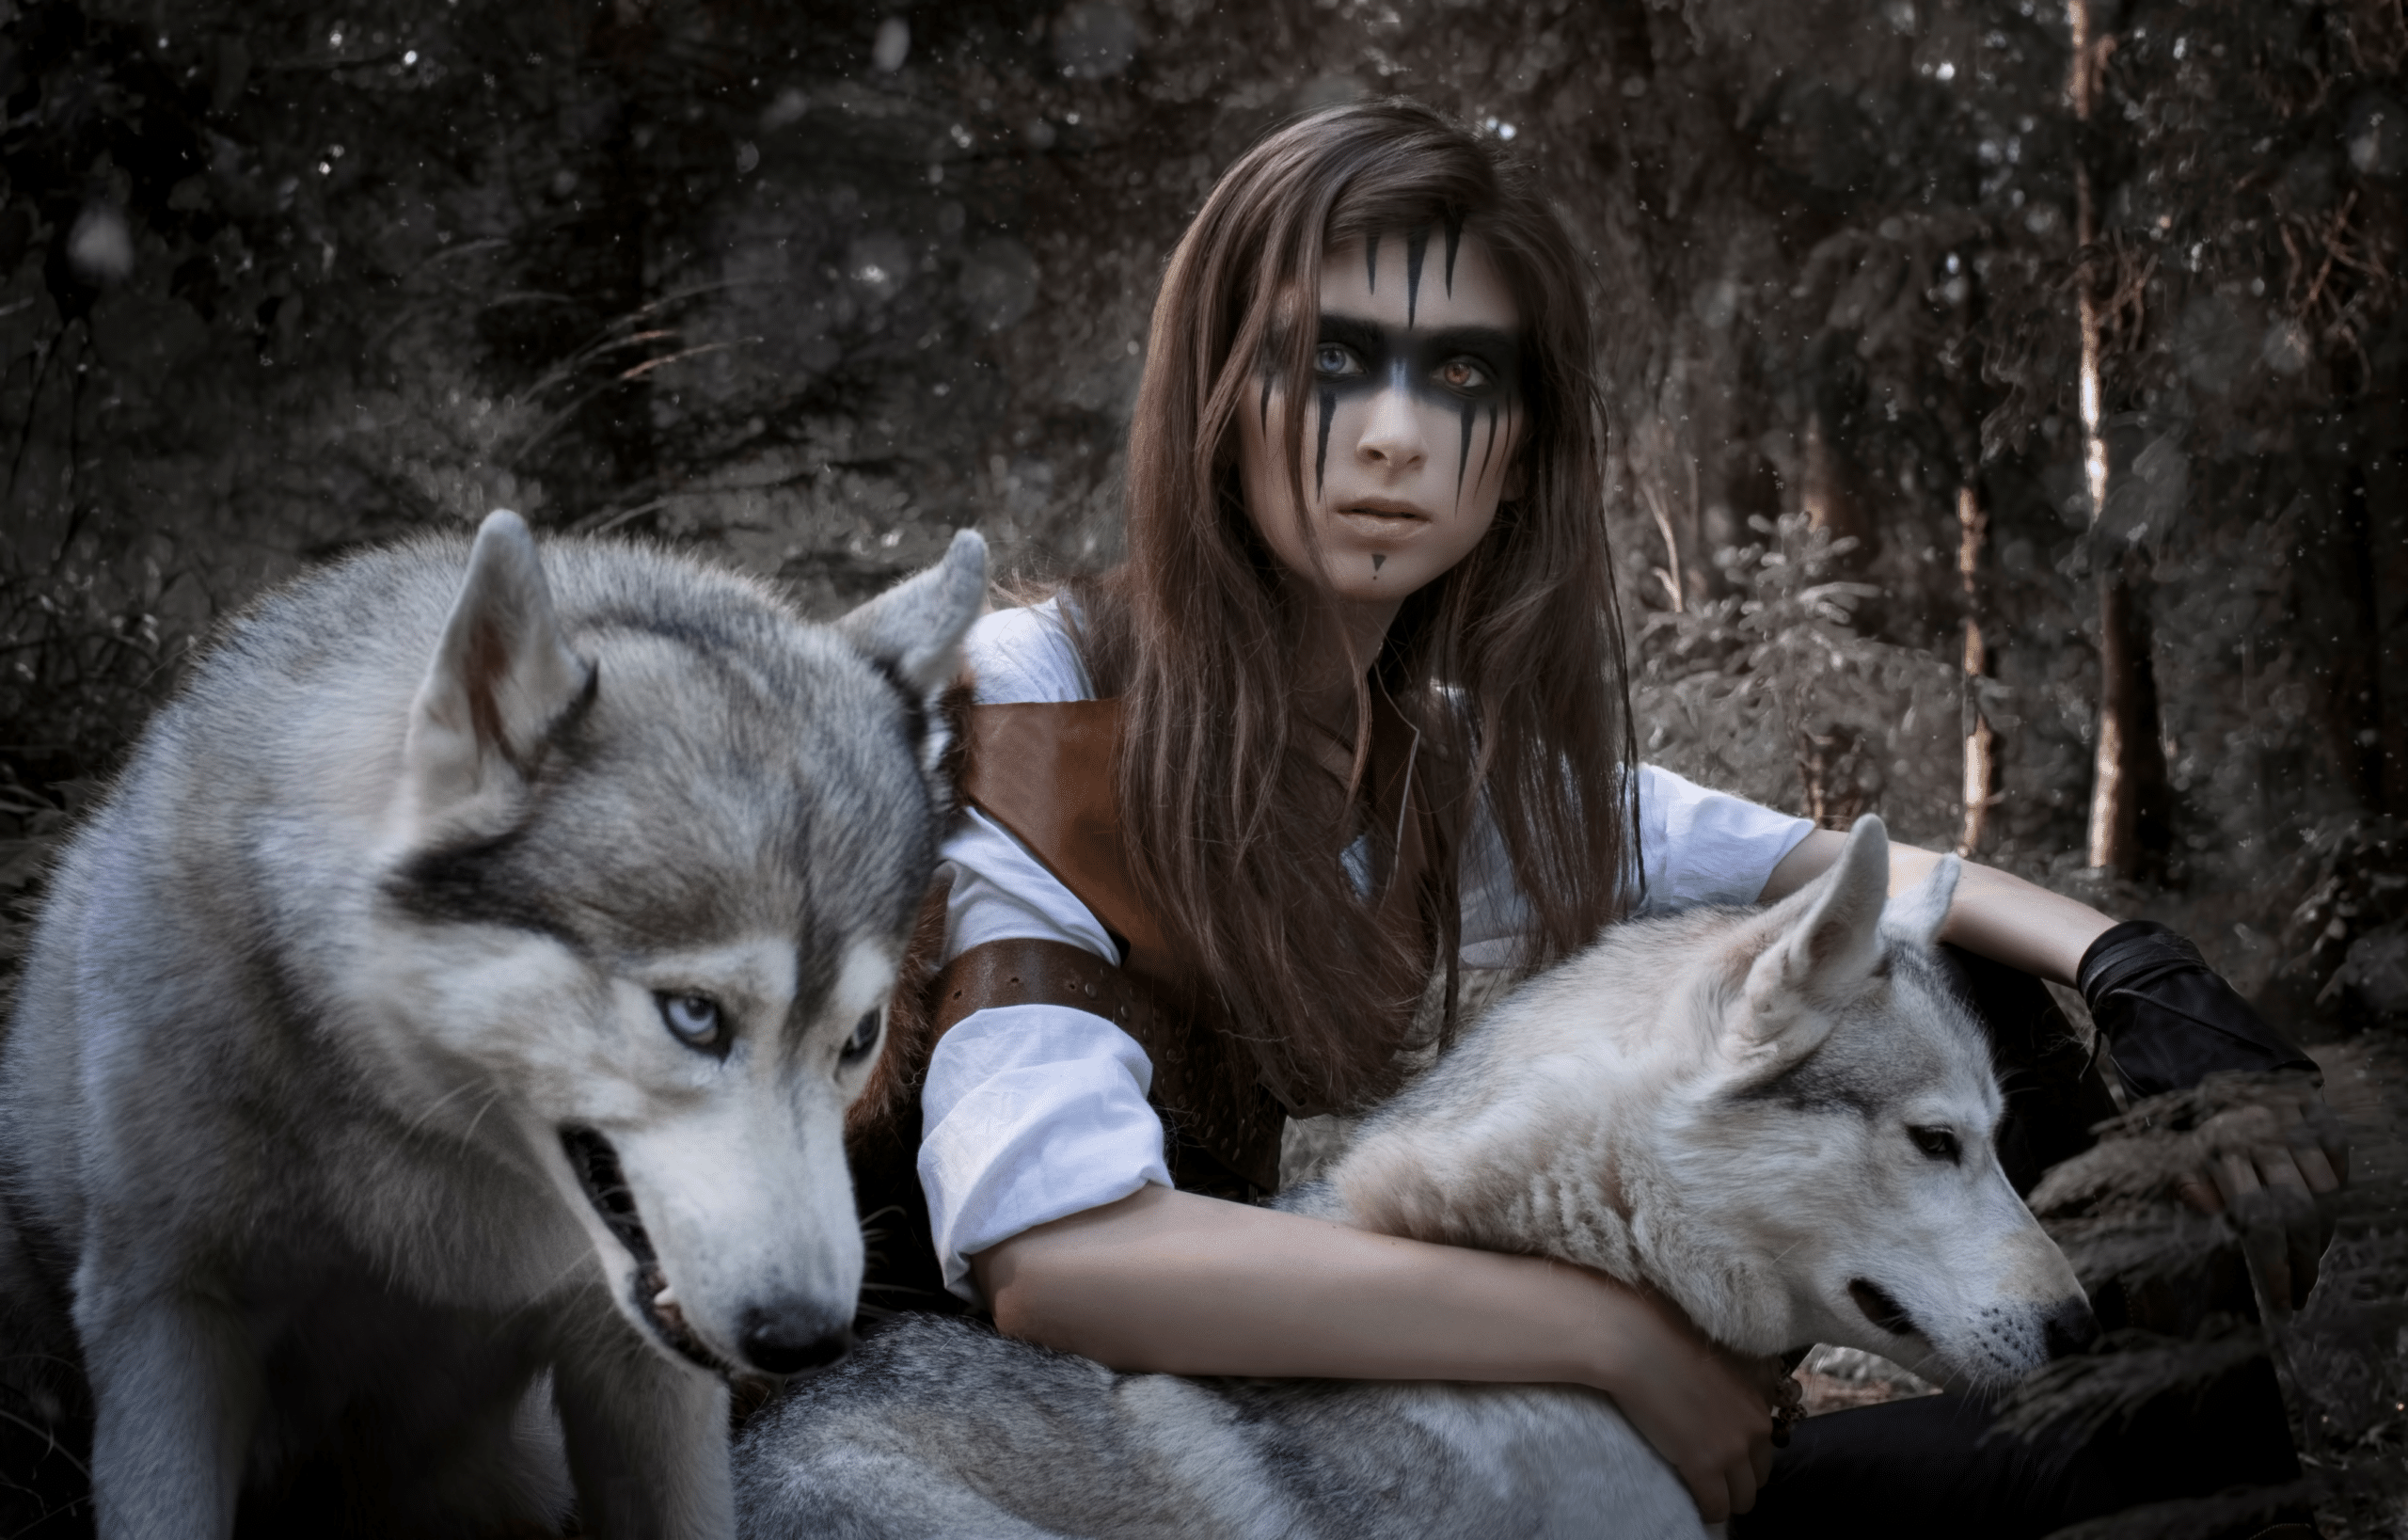 Early humans and the domestication of wolves